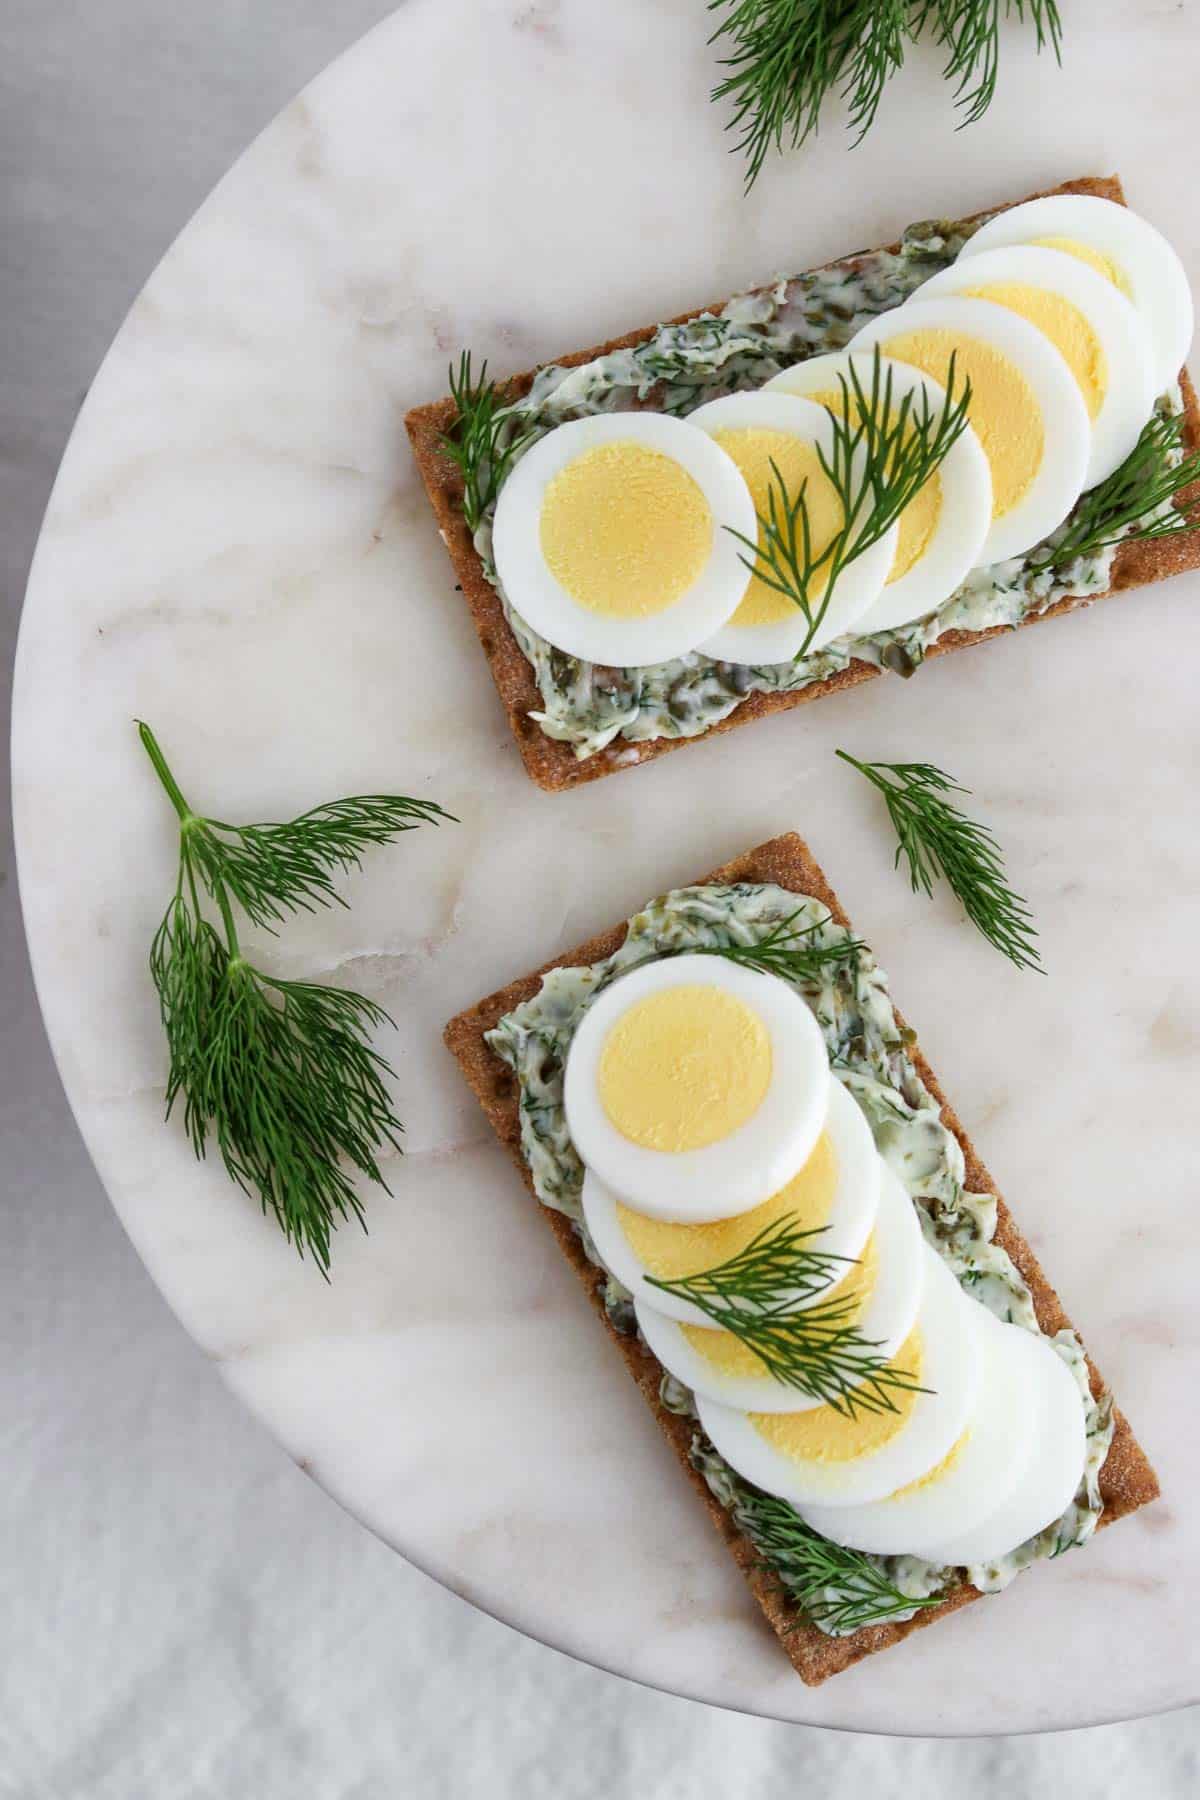 Overhead view of crispbread spread with dill caper butter and toped with hard-boiled egg and sprigs of dill.